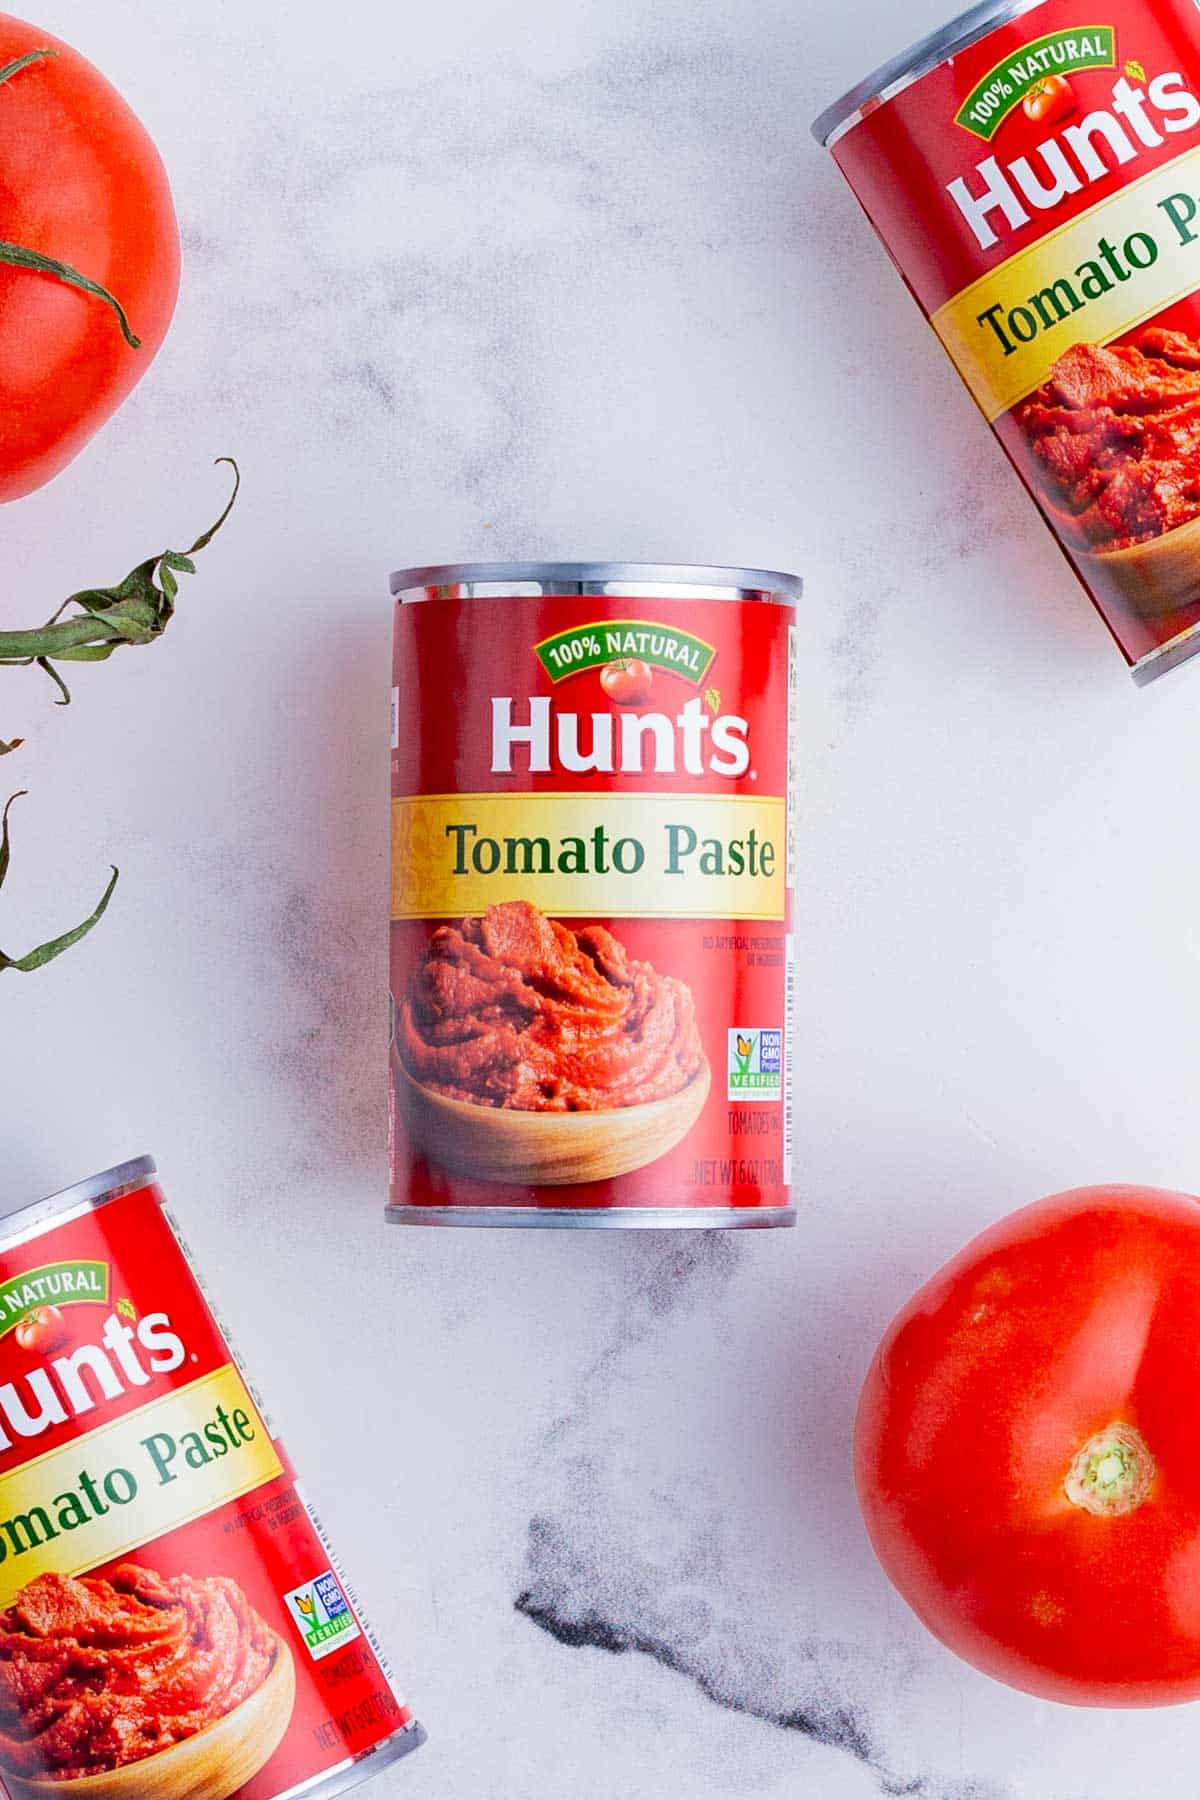 Several cans of tomato paste with fresh, whole tomatoes.